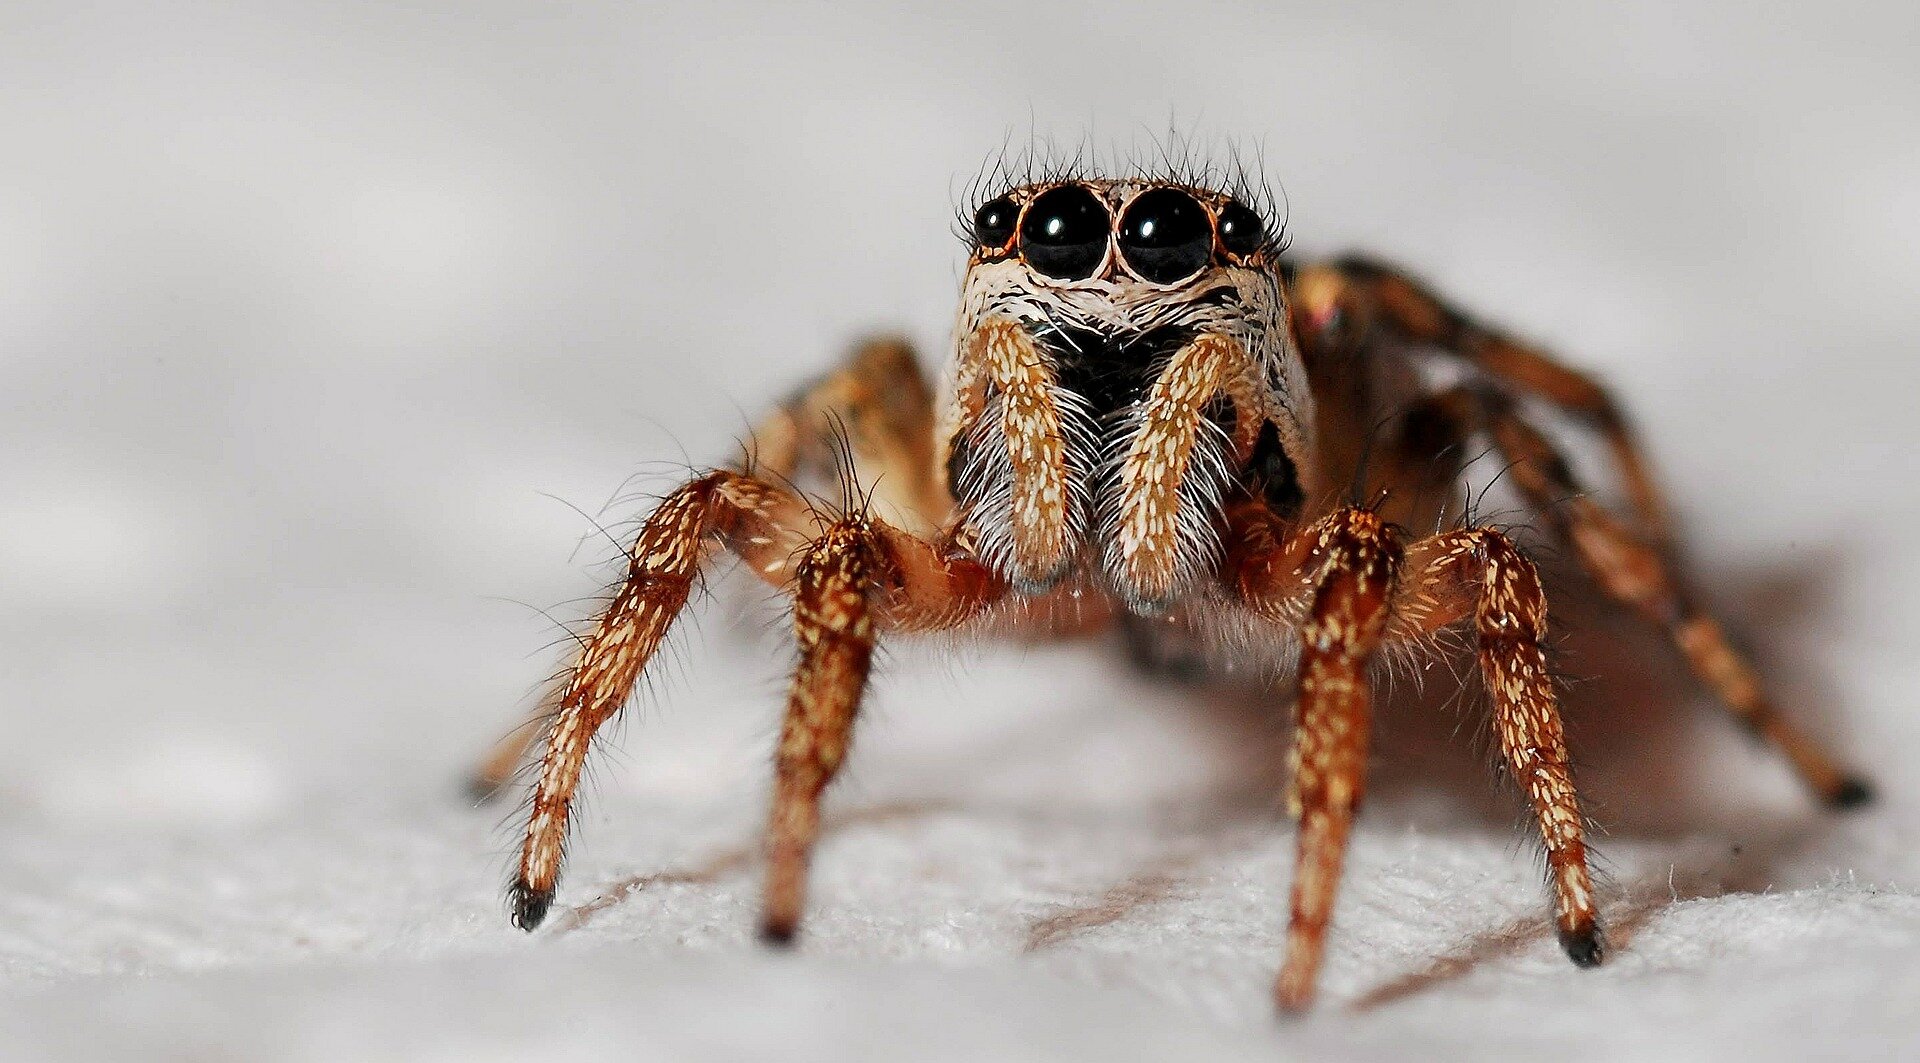 How can spiders locate their prey?